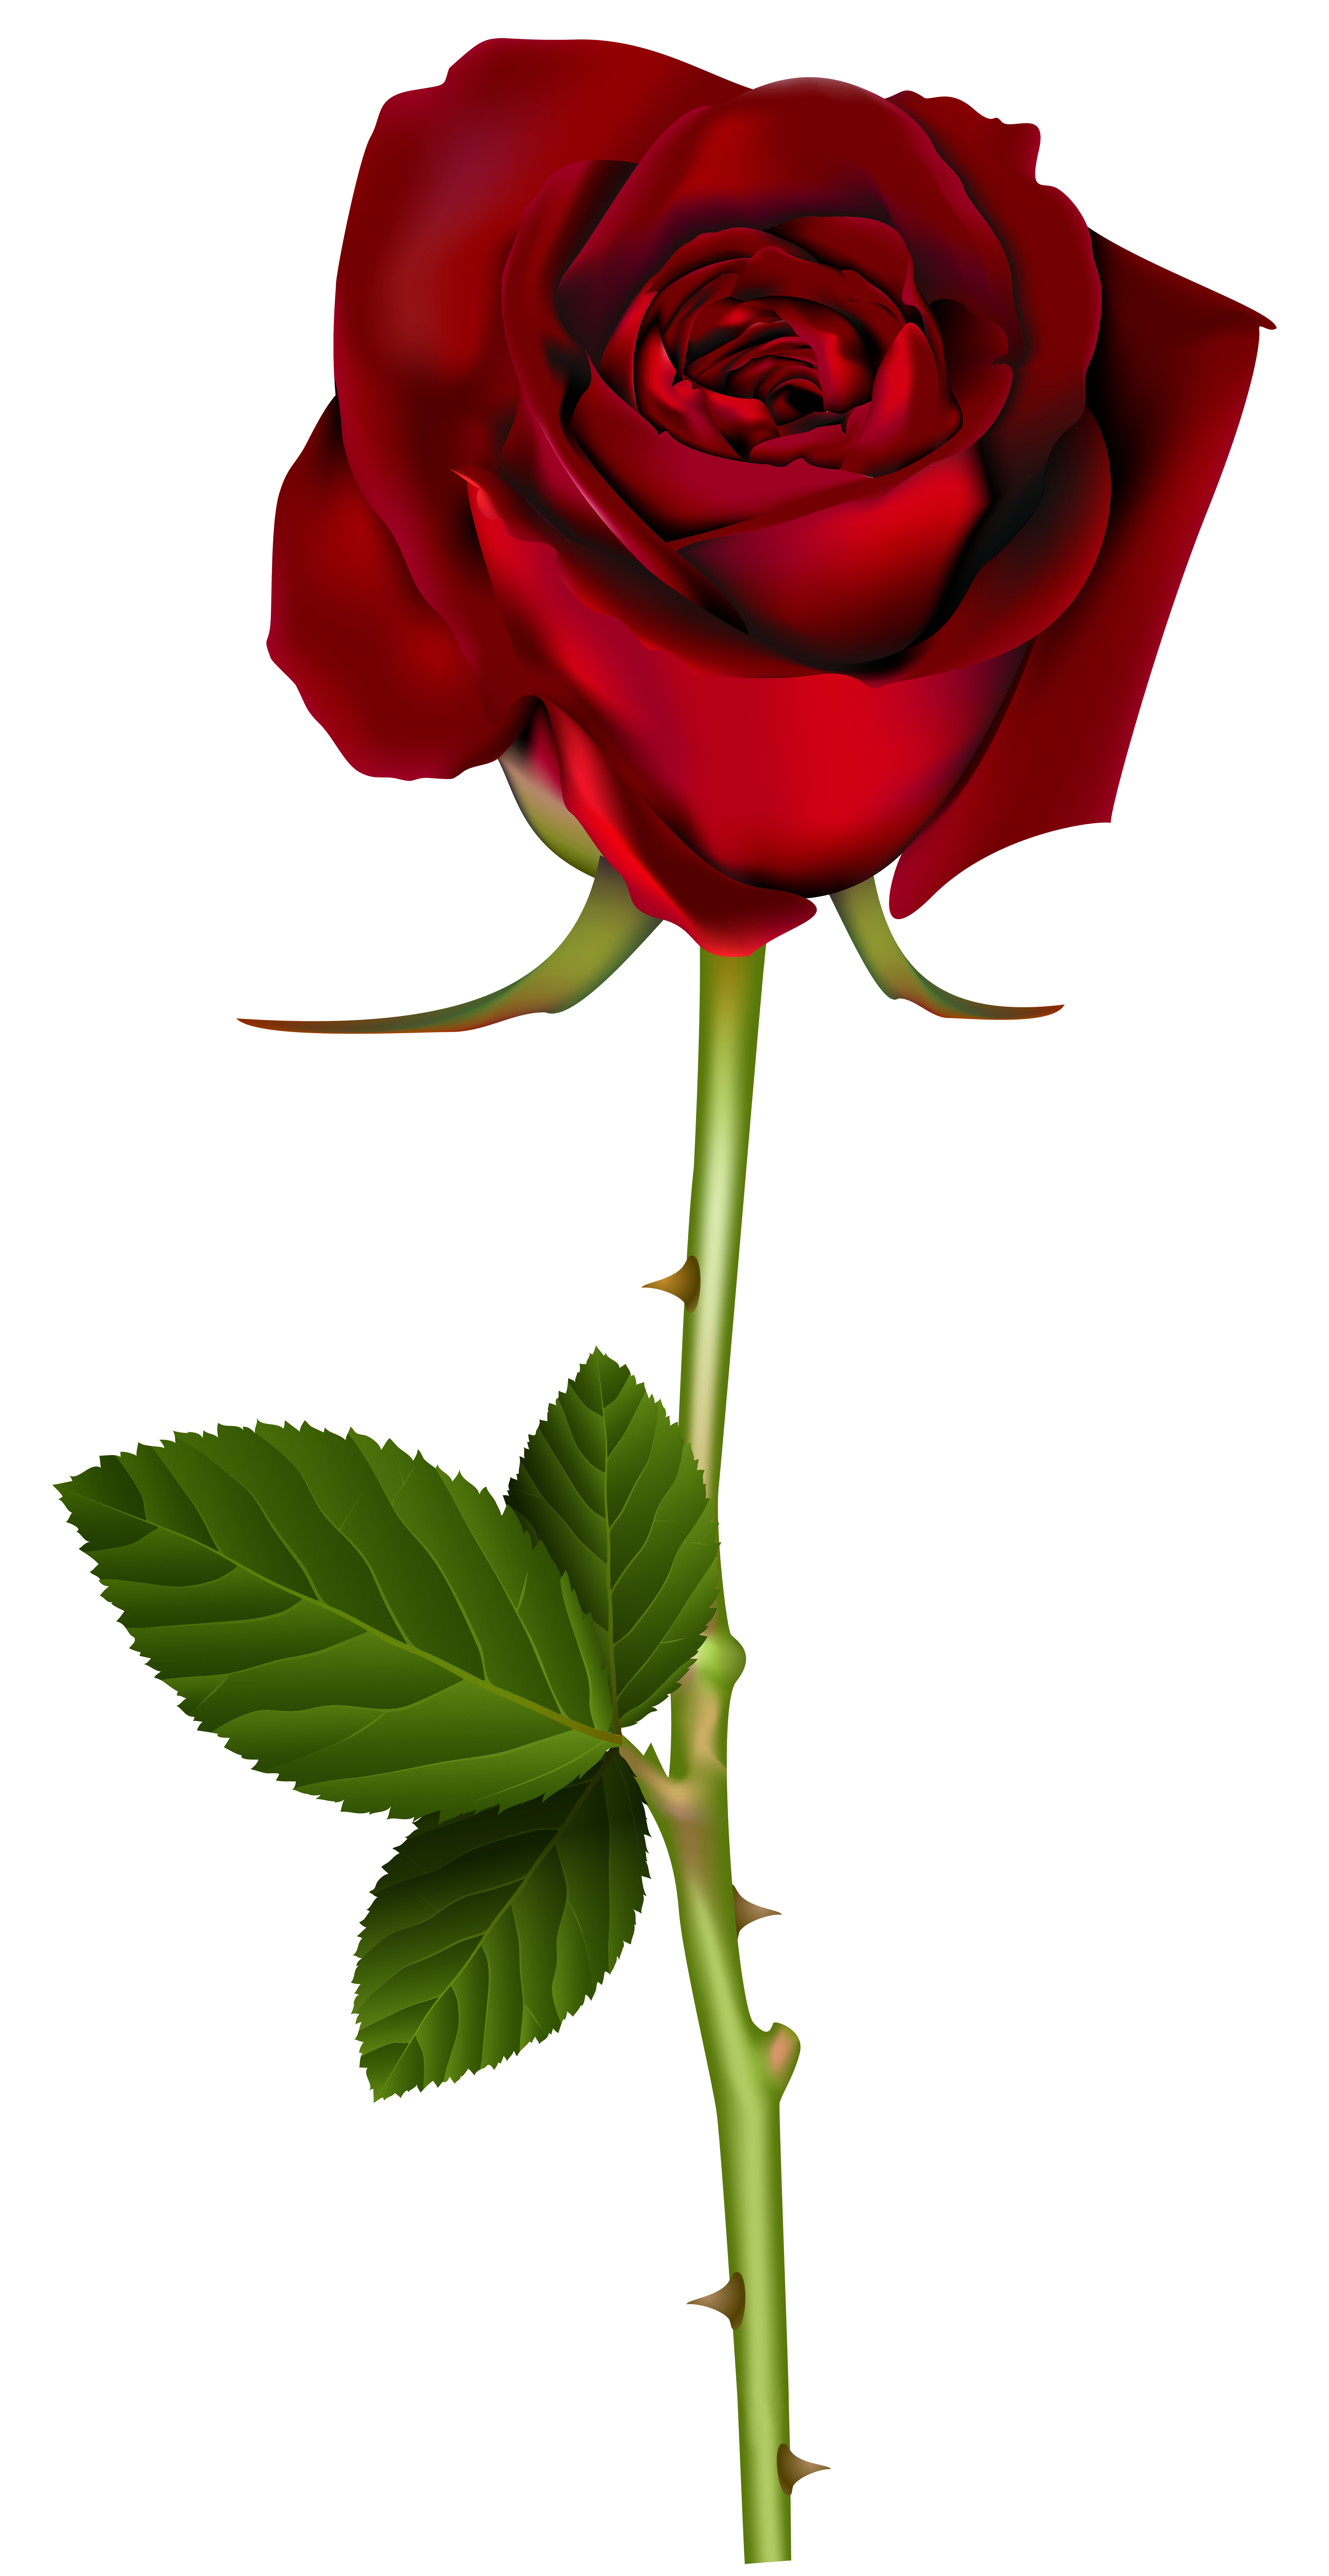 Png transparent images. Red rose image gallery